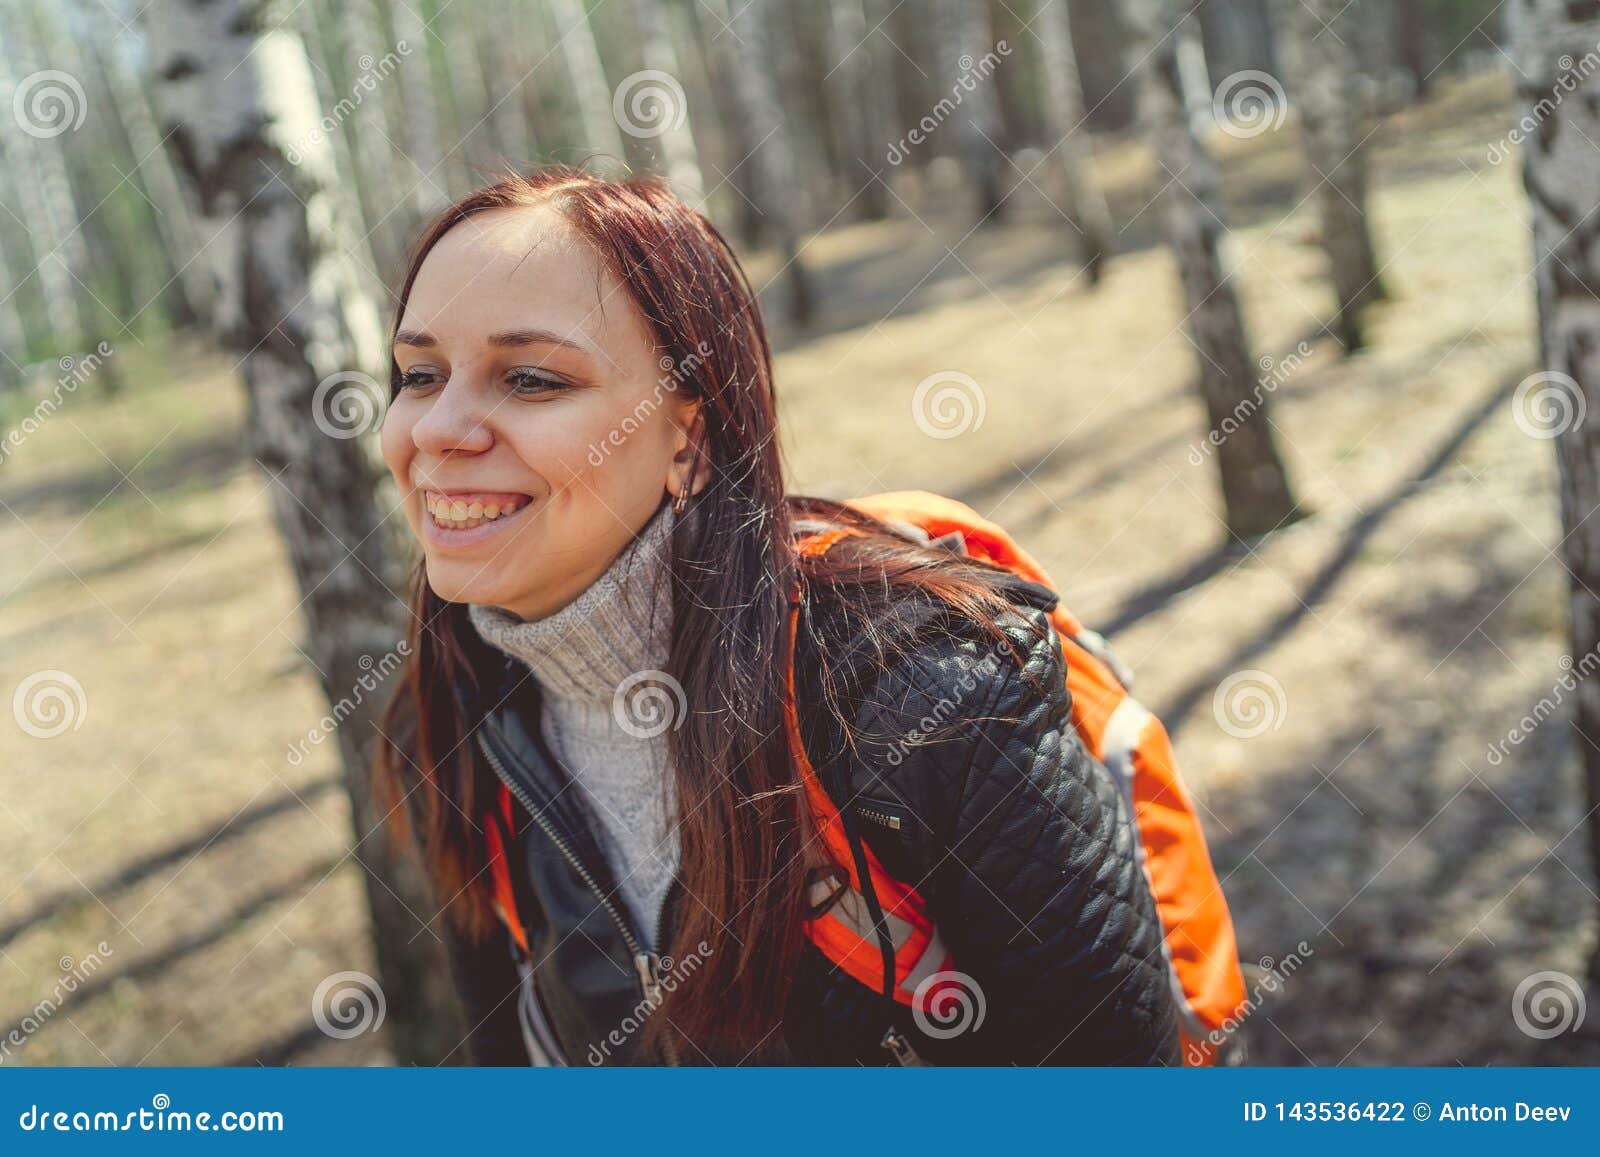 Traveling Woman with Backpack in Woods Stock Photo - Image of looking ...